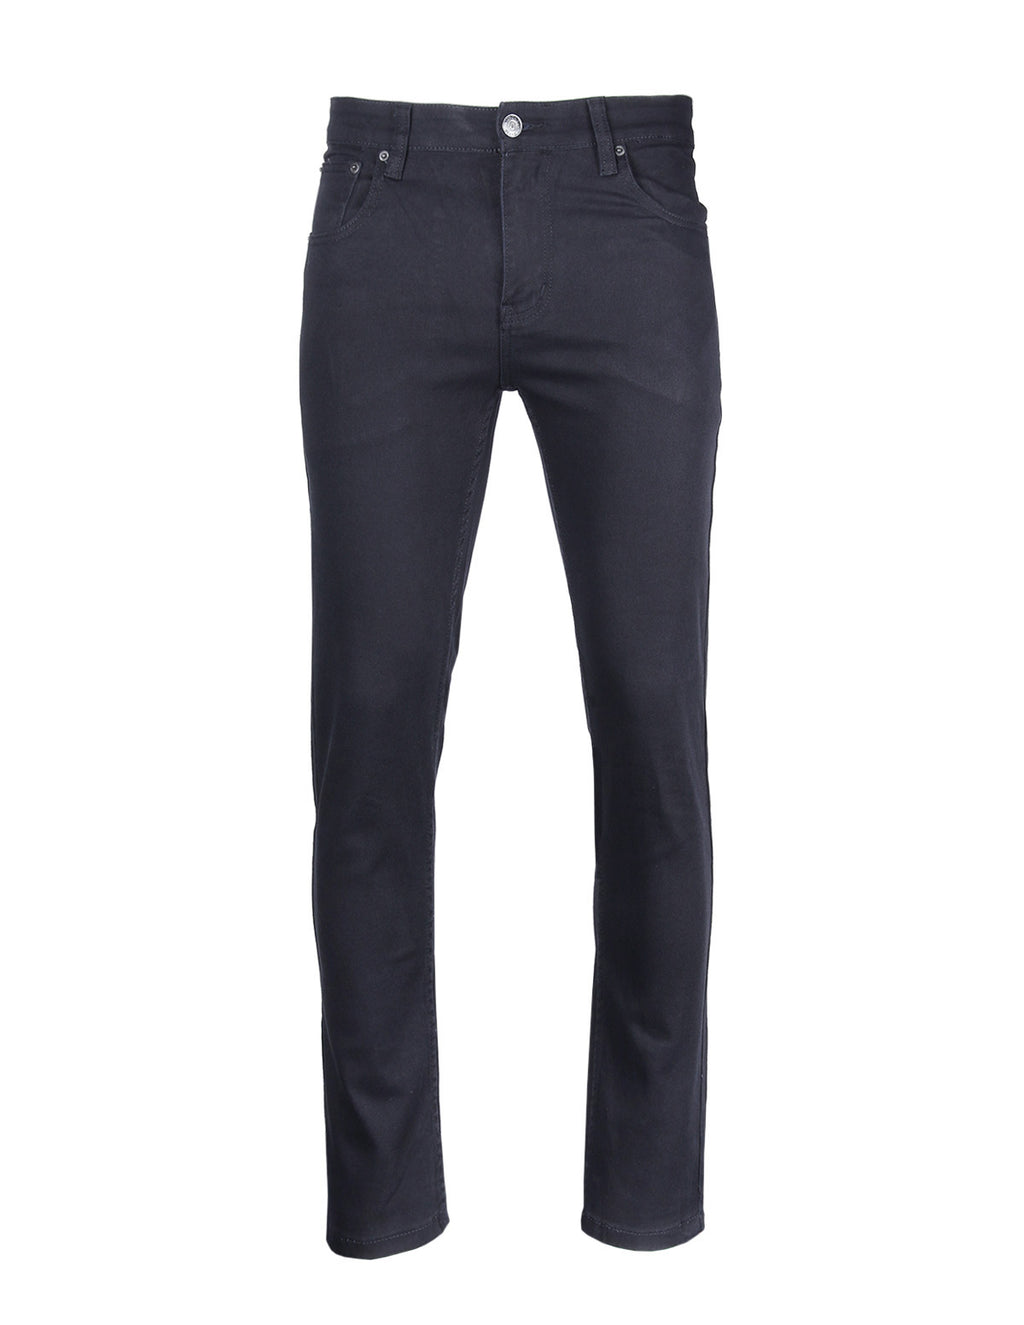 Victorious by ZIMEGO - Mens Skinny Fit Stretch Twill Pants - NAVY